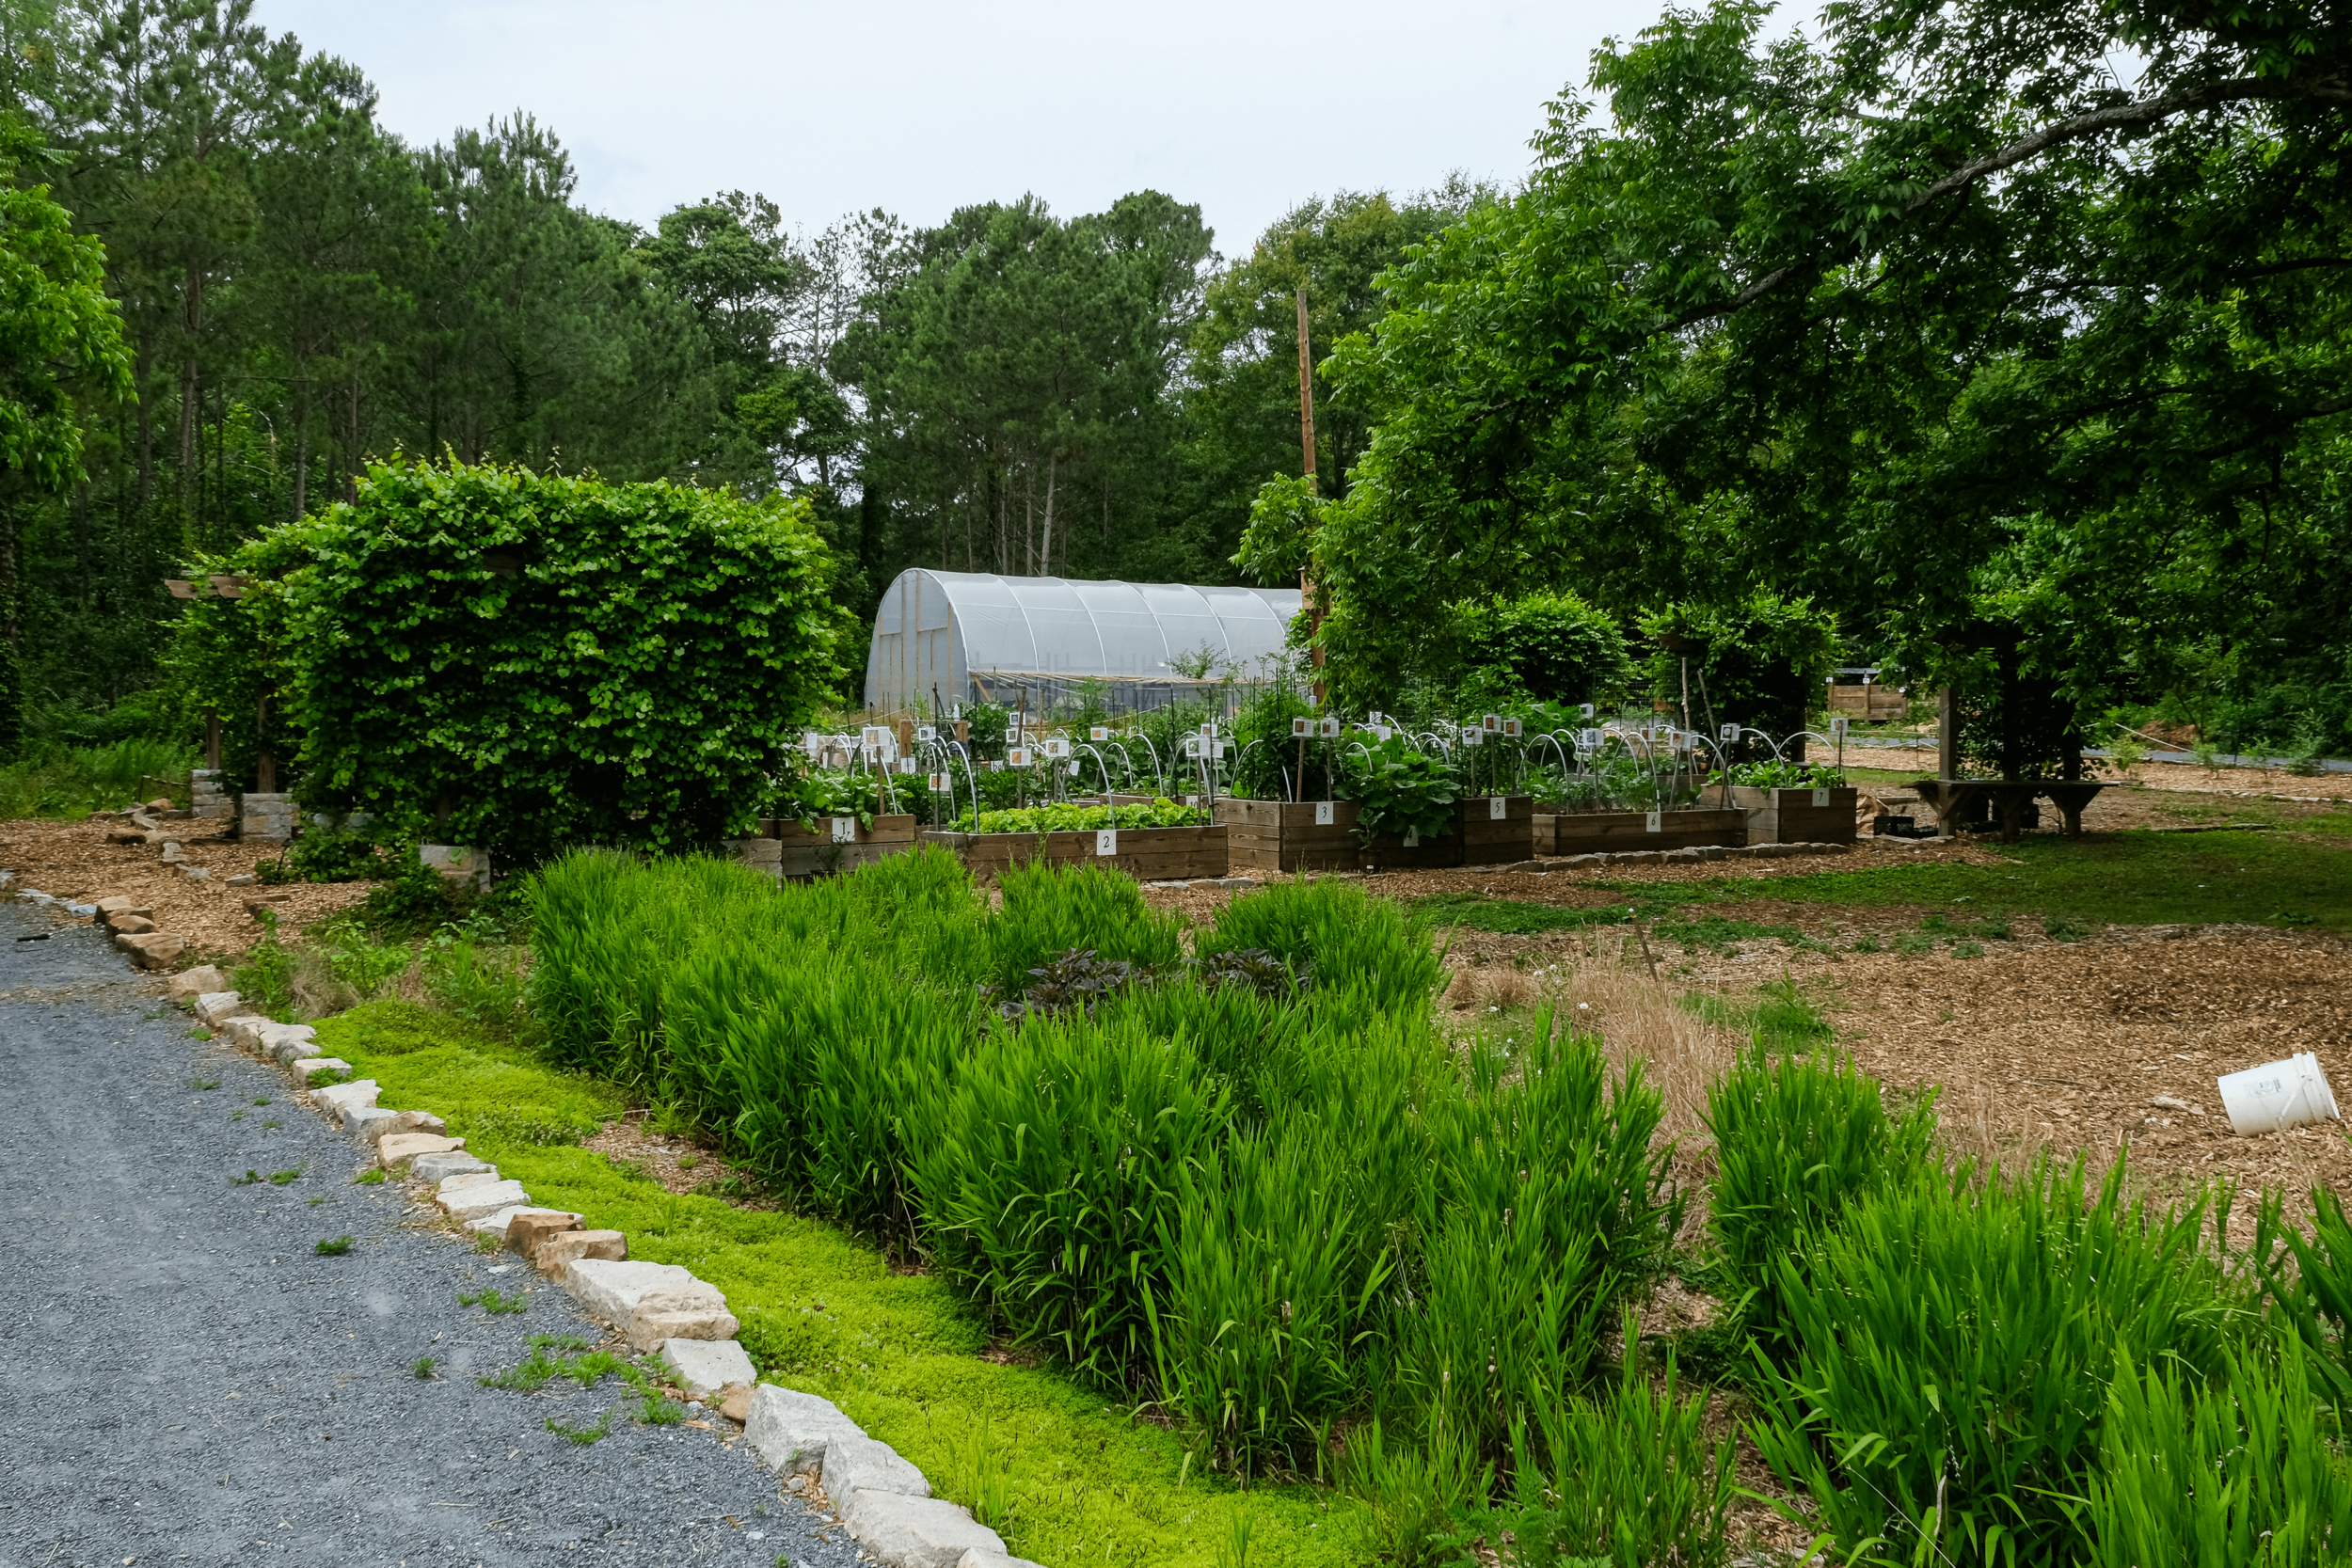 Urban Food Forest at Browns Mill; image sourced from Jeffrey Landau